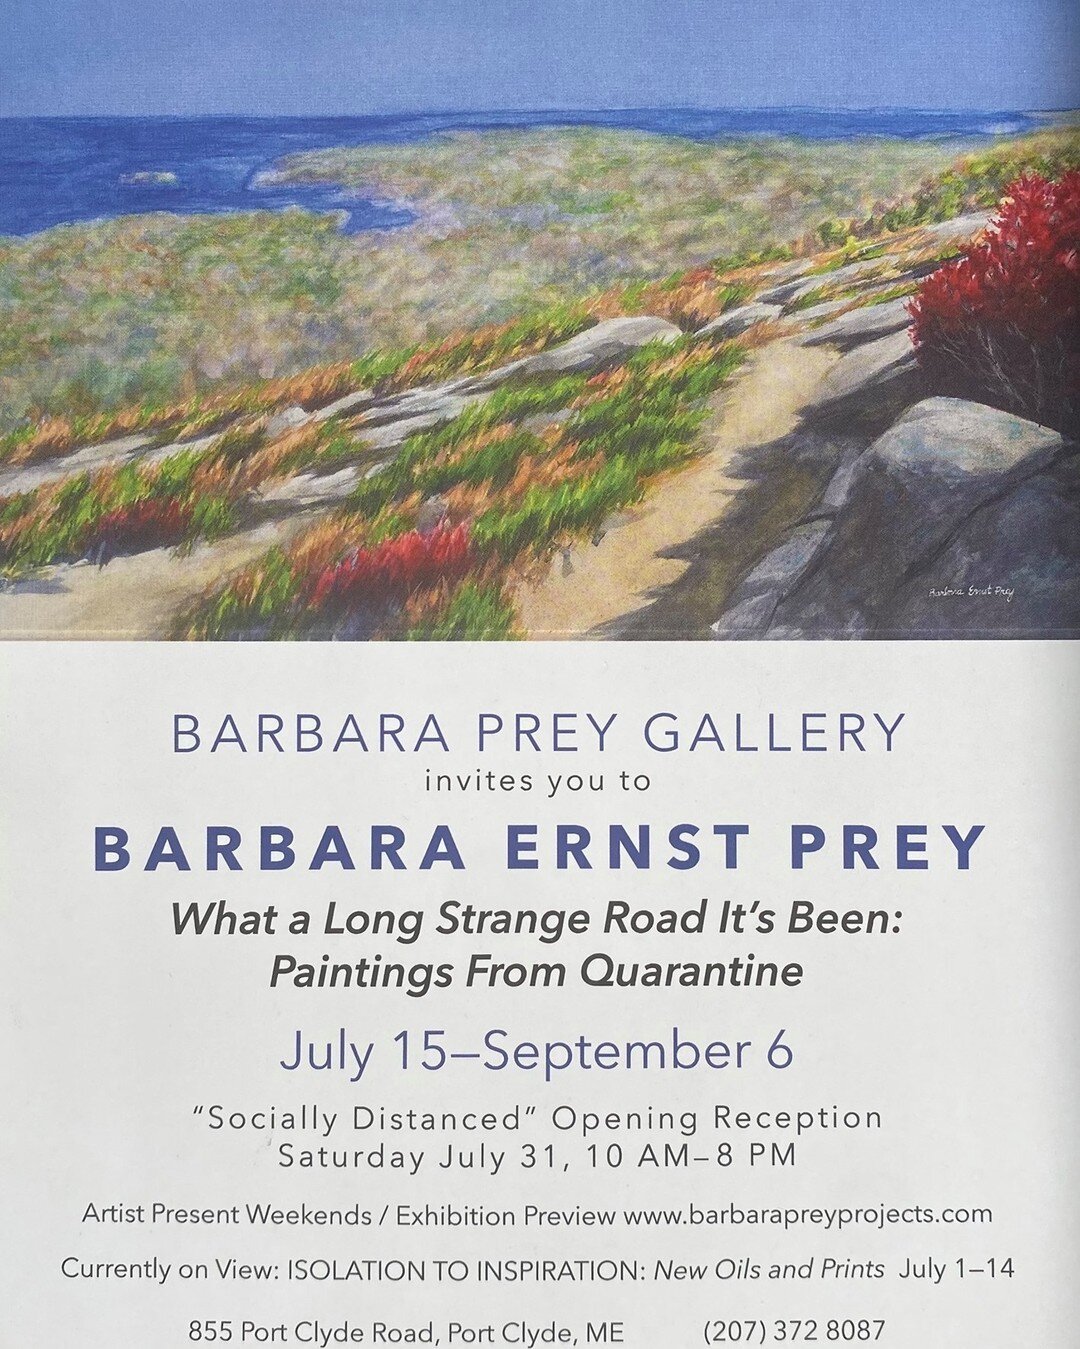 Mark your calendar! We are hosting an all day opening reception next Saturday, July 31st right here at Barbara Prey Projects. You will have the amazing opportunity to meet Barbara Ernst Prey, view her new watercolor and oil paintings, and enjoy some 